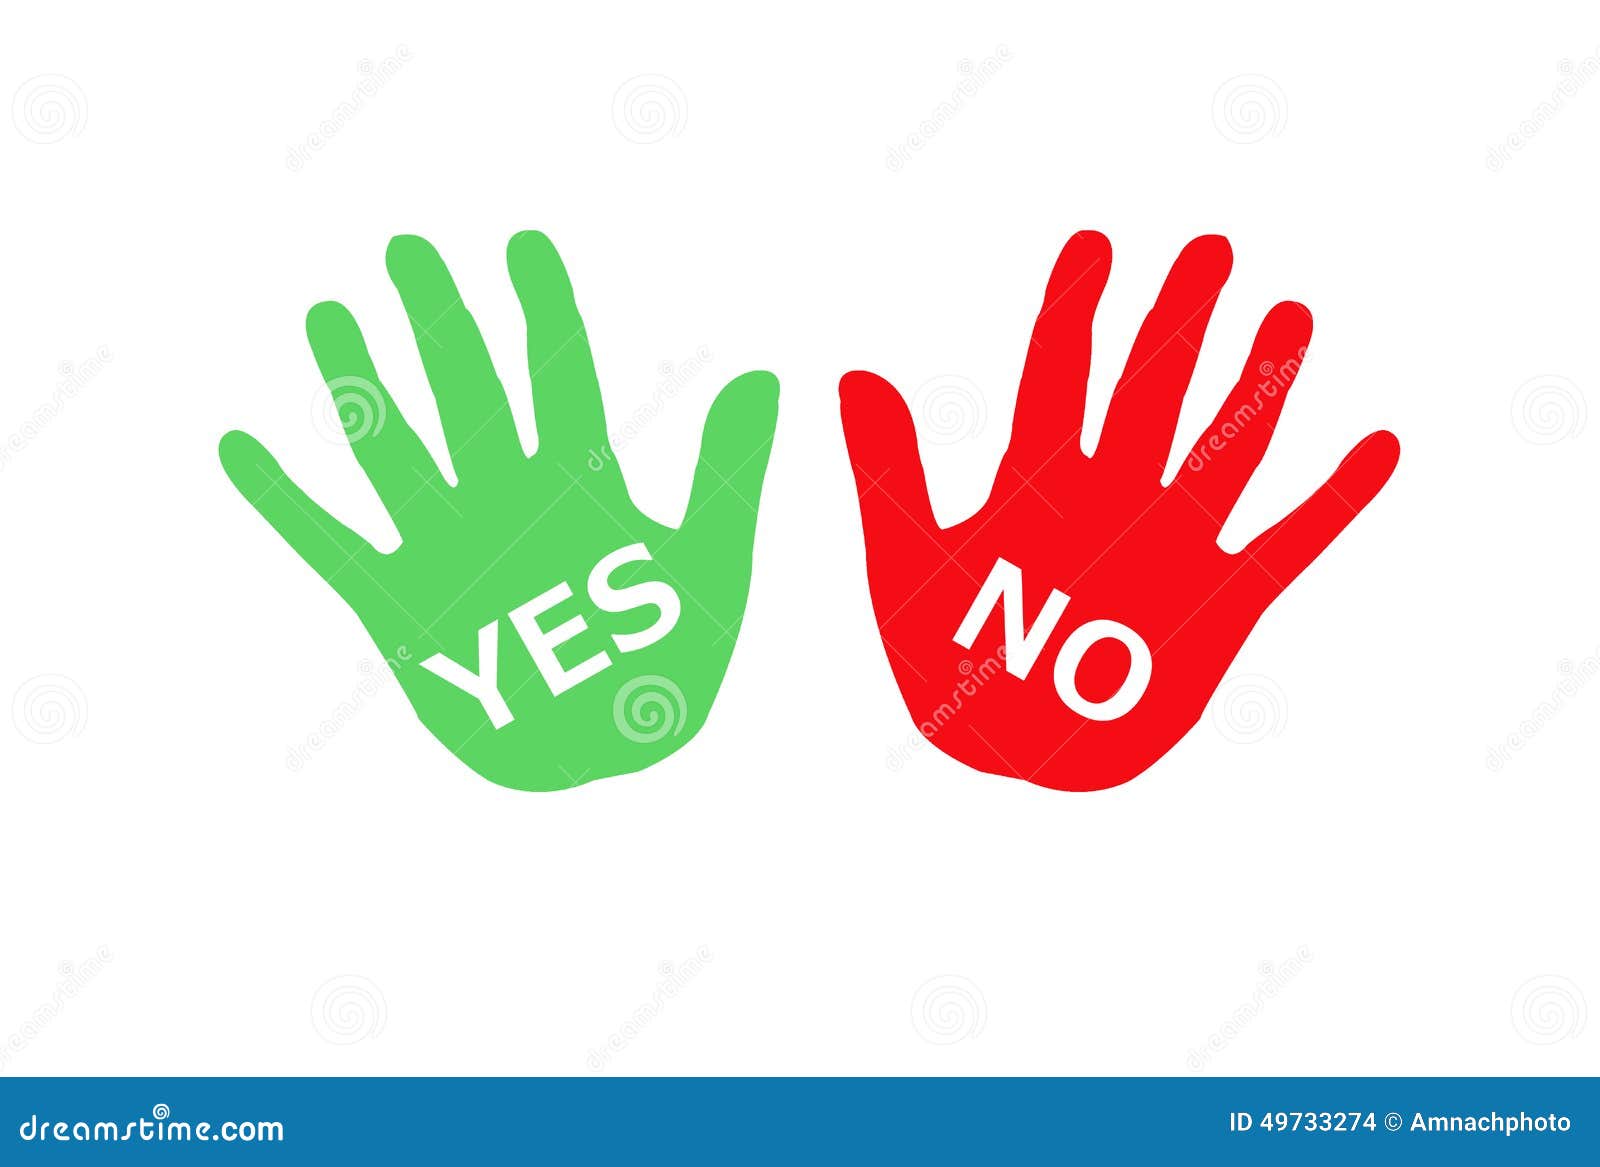 yes no clipart free - photo #33